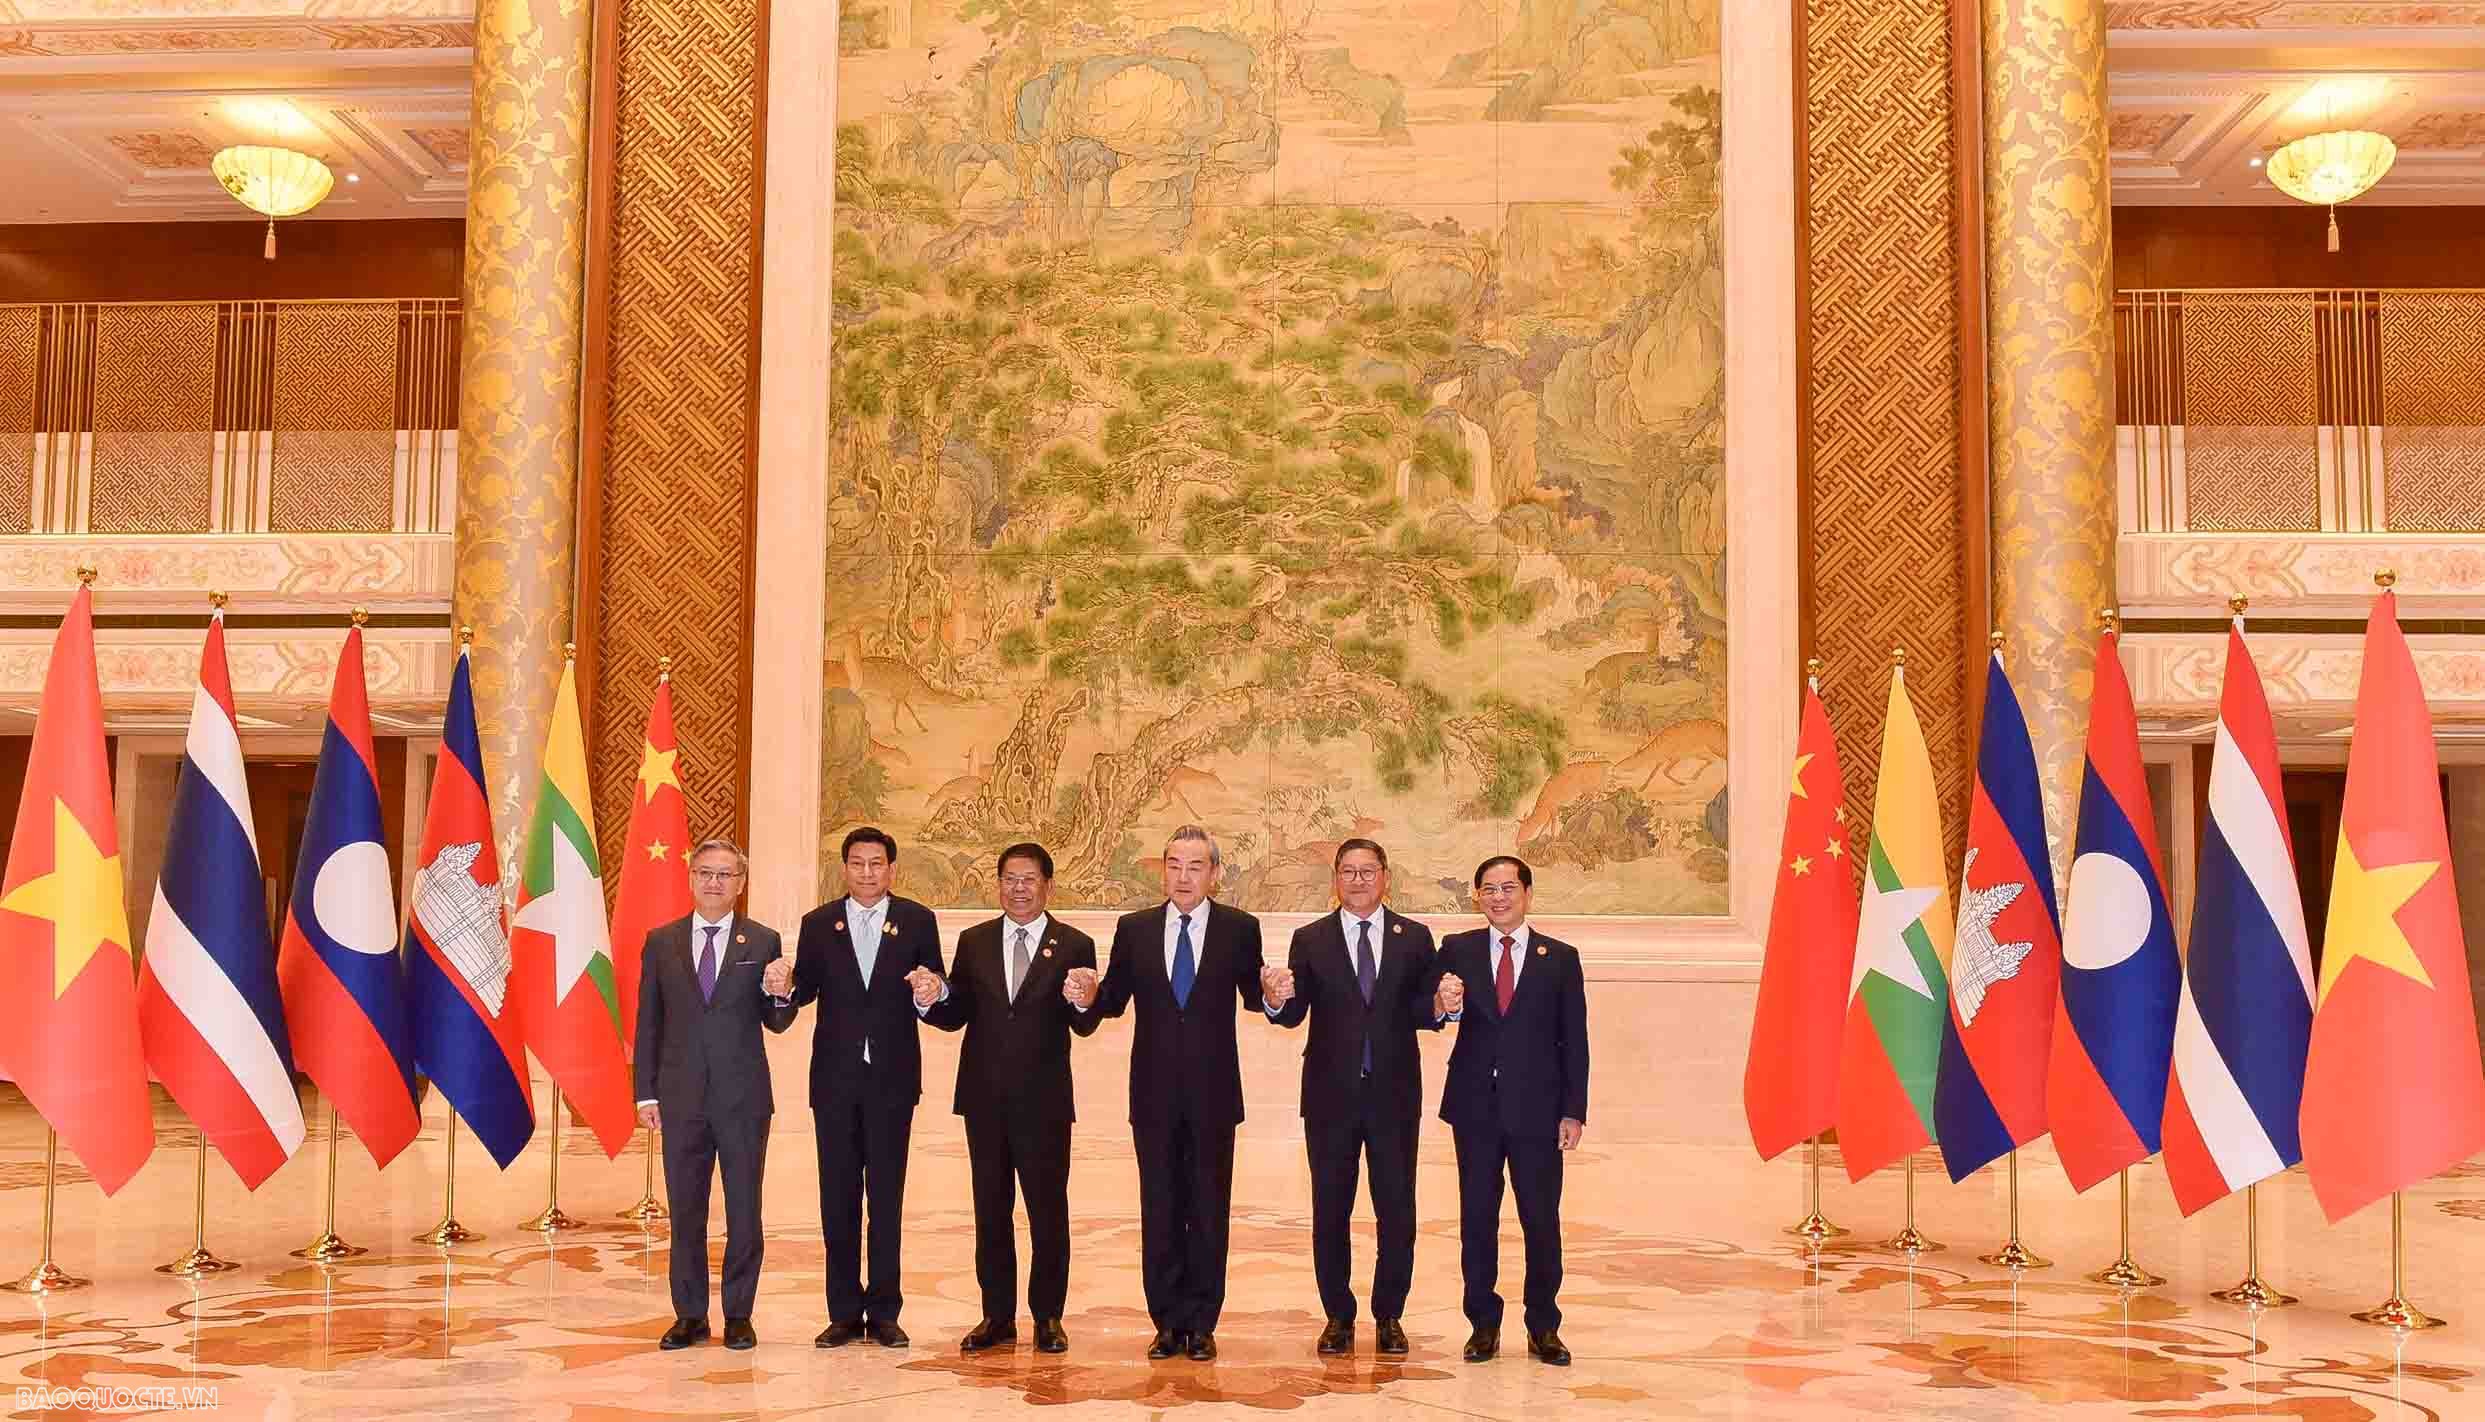 FM Bui Thanh Son attends 8th MLC Foreign Ministers' Meeting in China